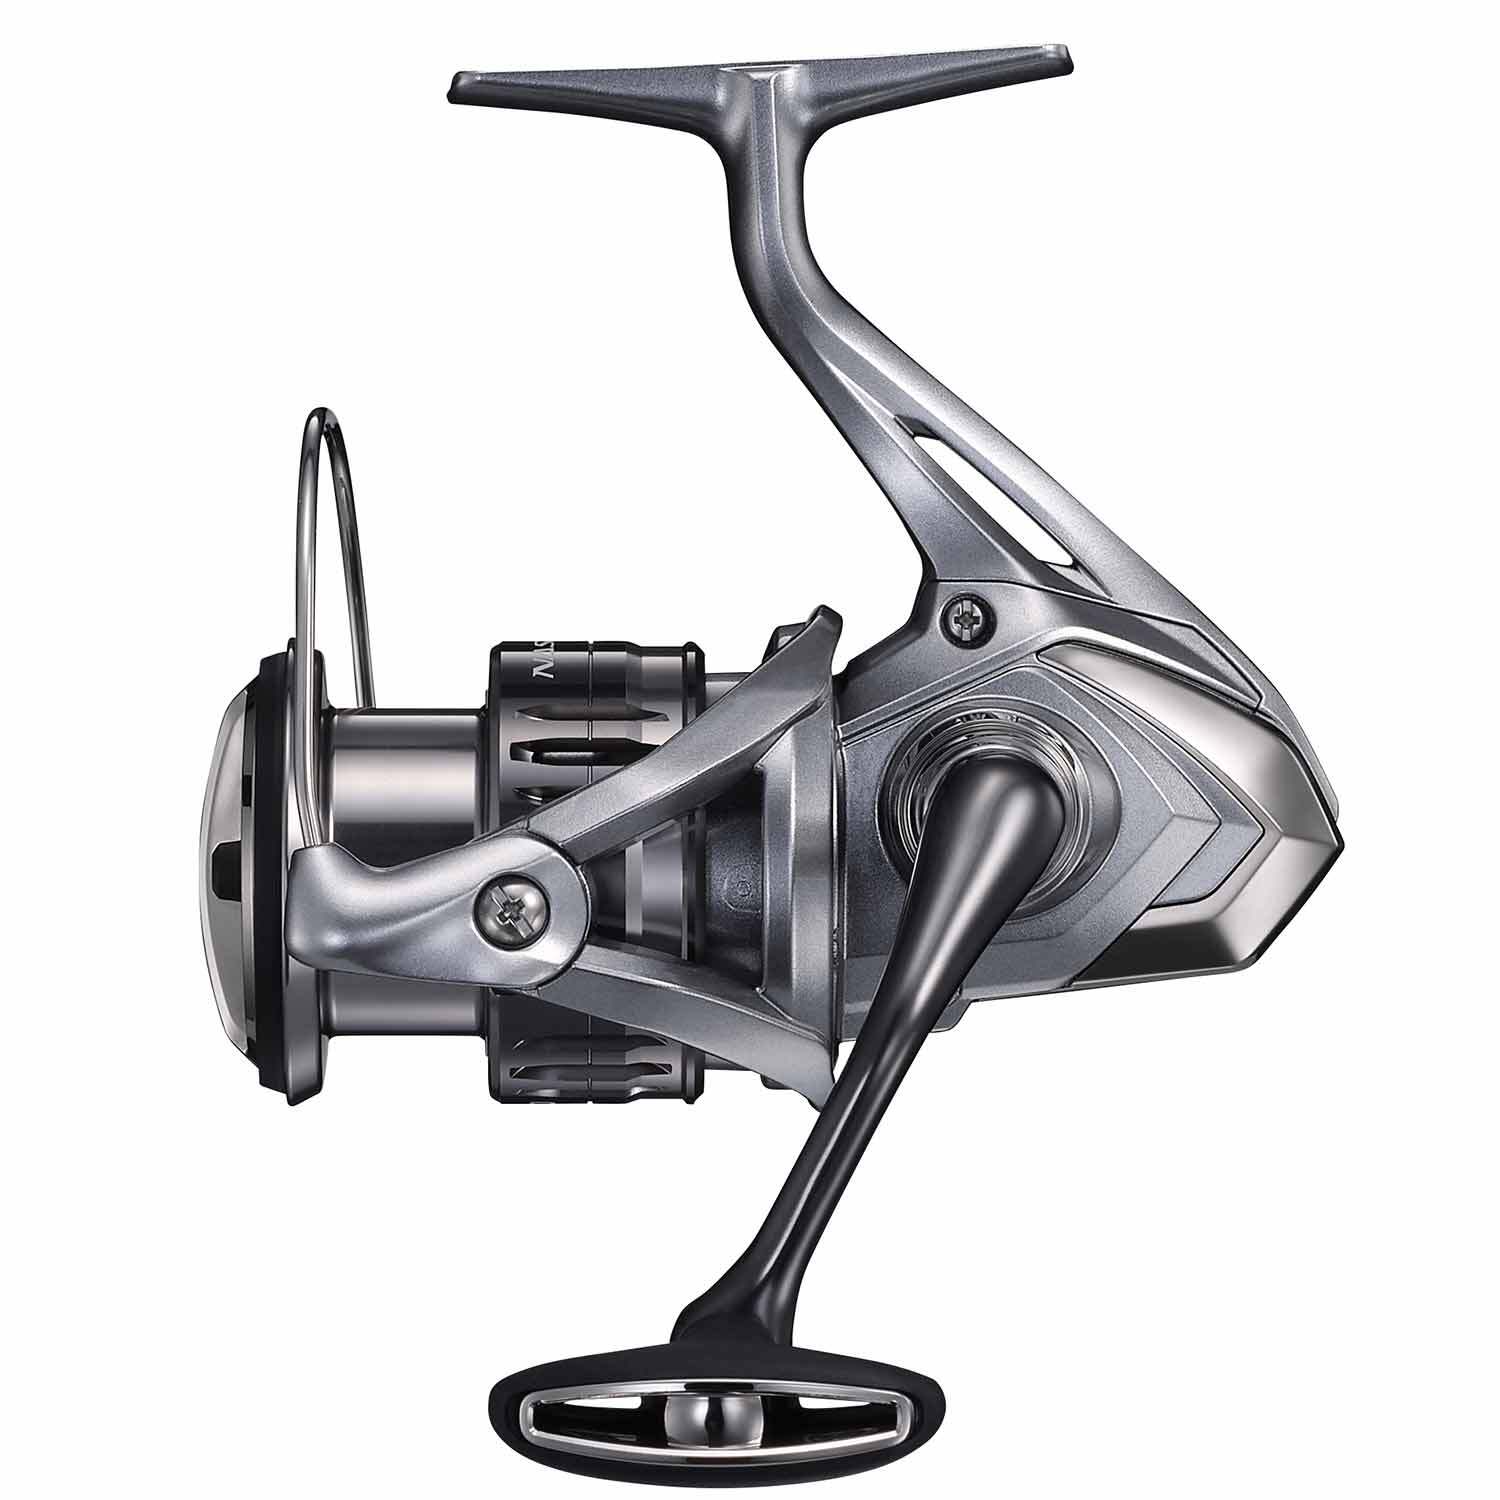 Details about   Genuine Shimano 16 NASCI 2500HGS Spinning Reel 